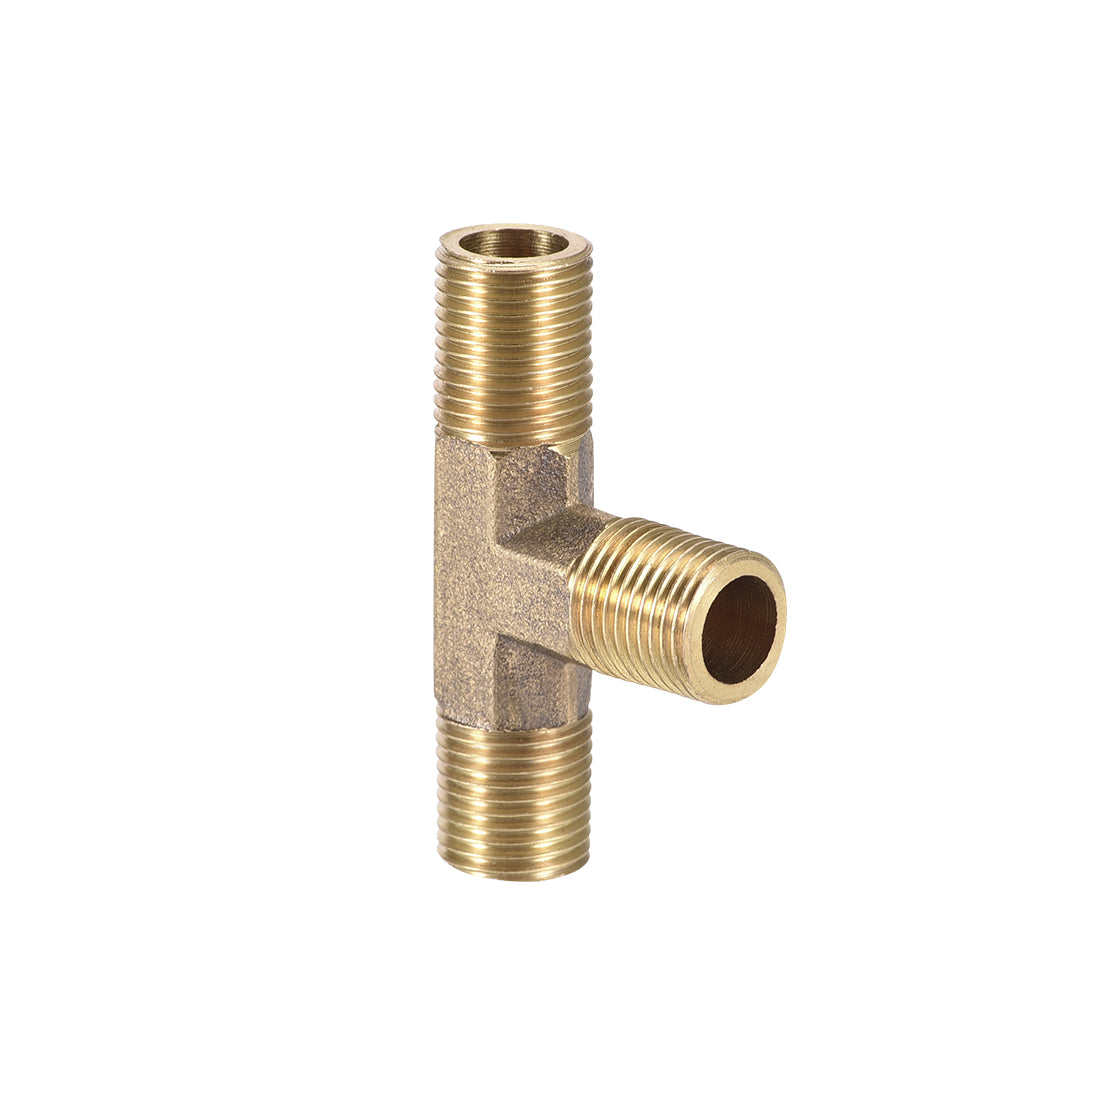 Uxcell Uxcell Brass Tee Pipe Fitting 1/4BSP Male Thread T Shaped Connector Coupler